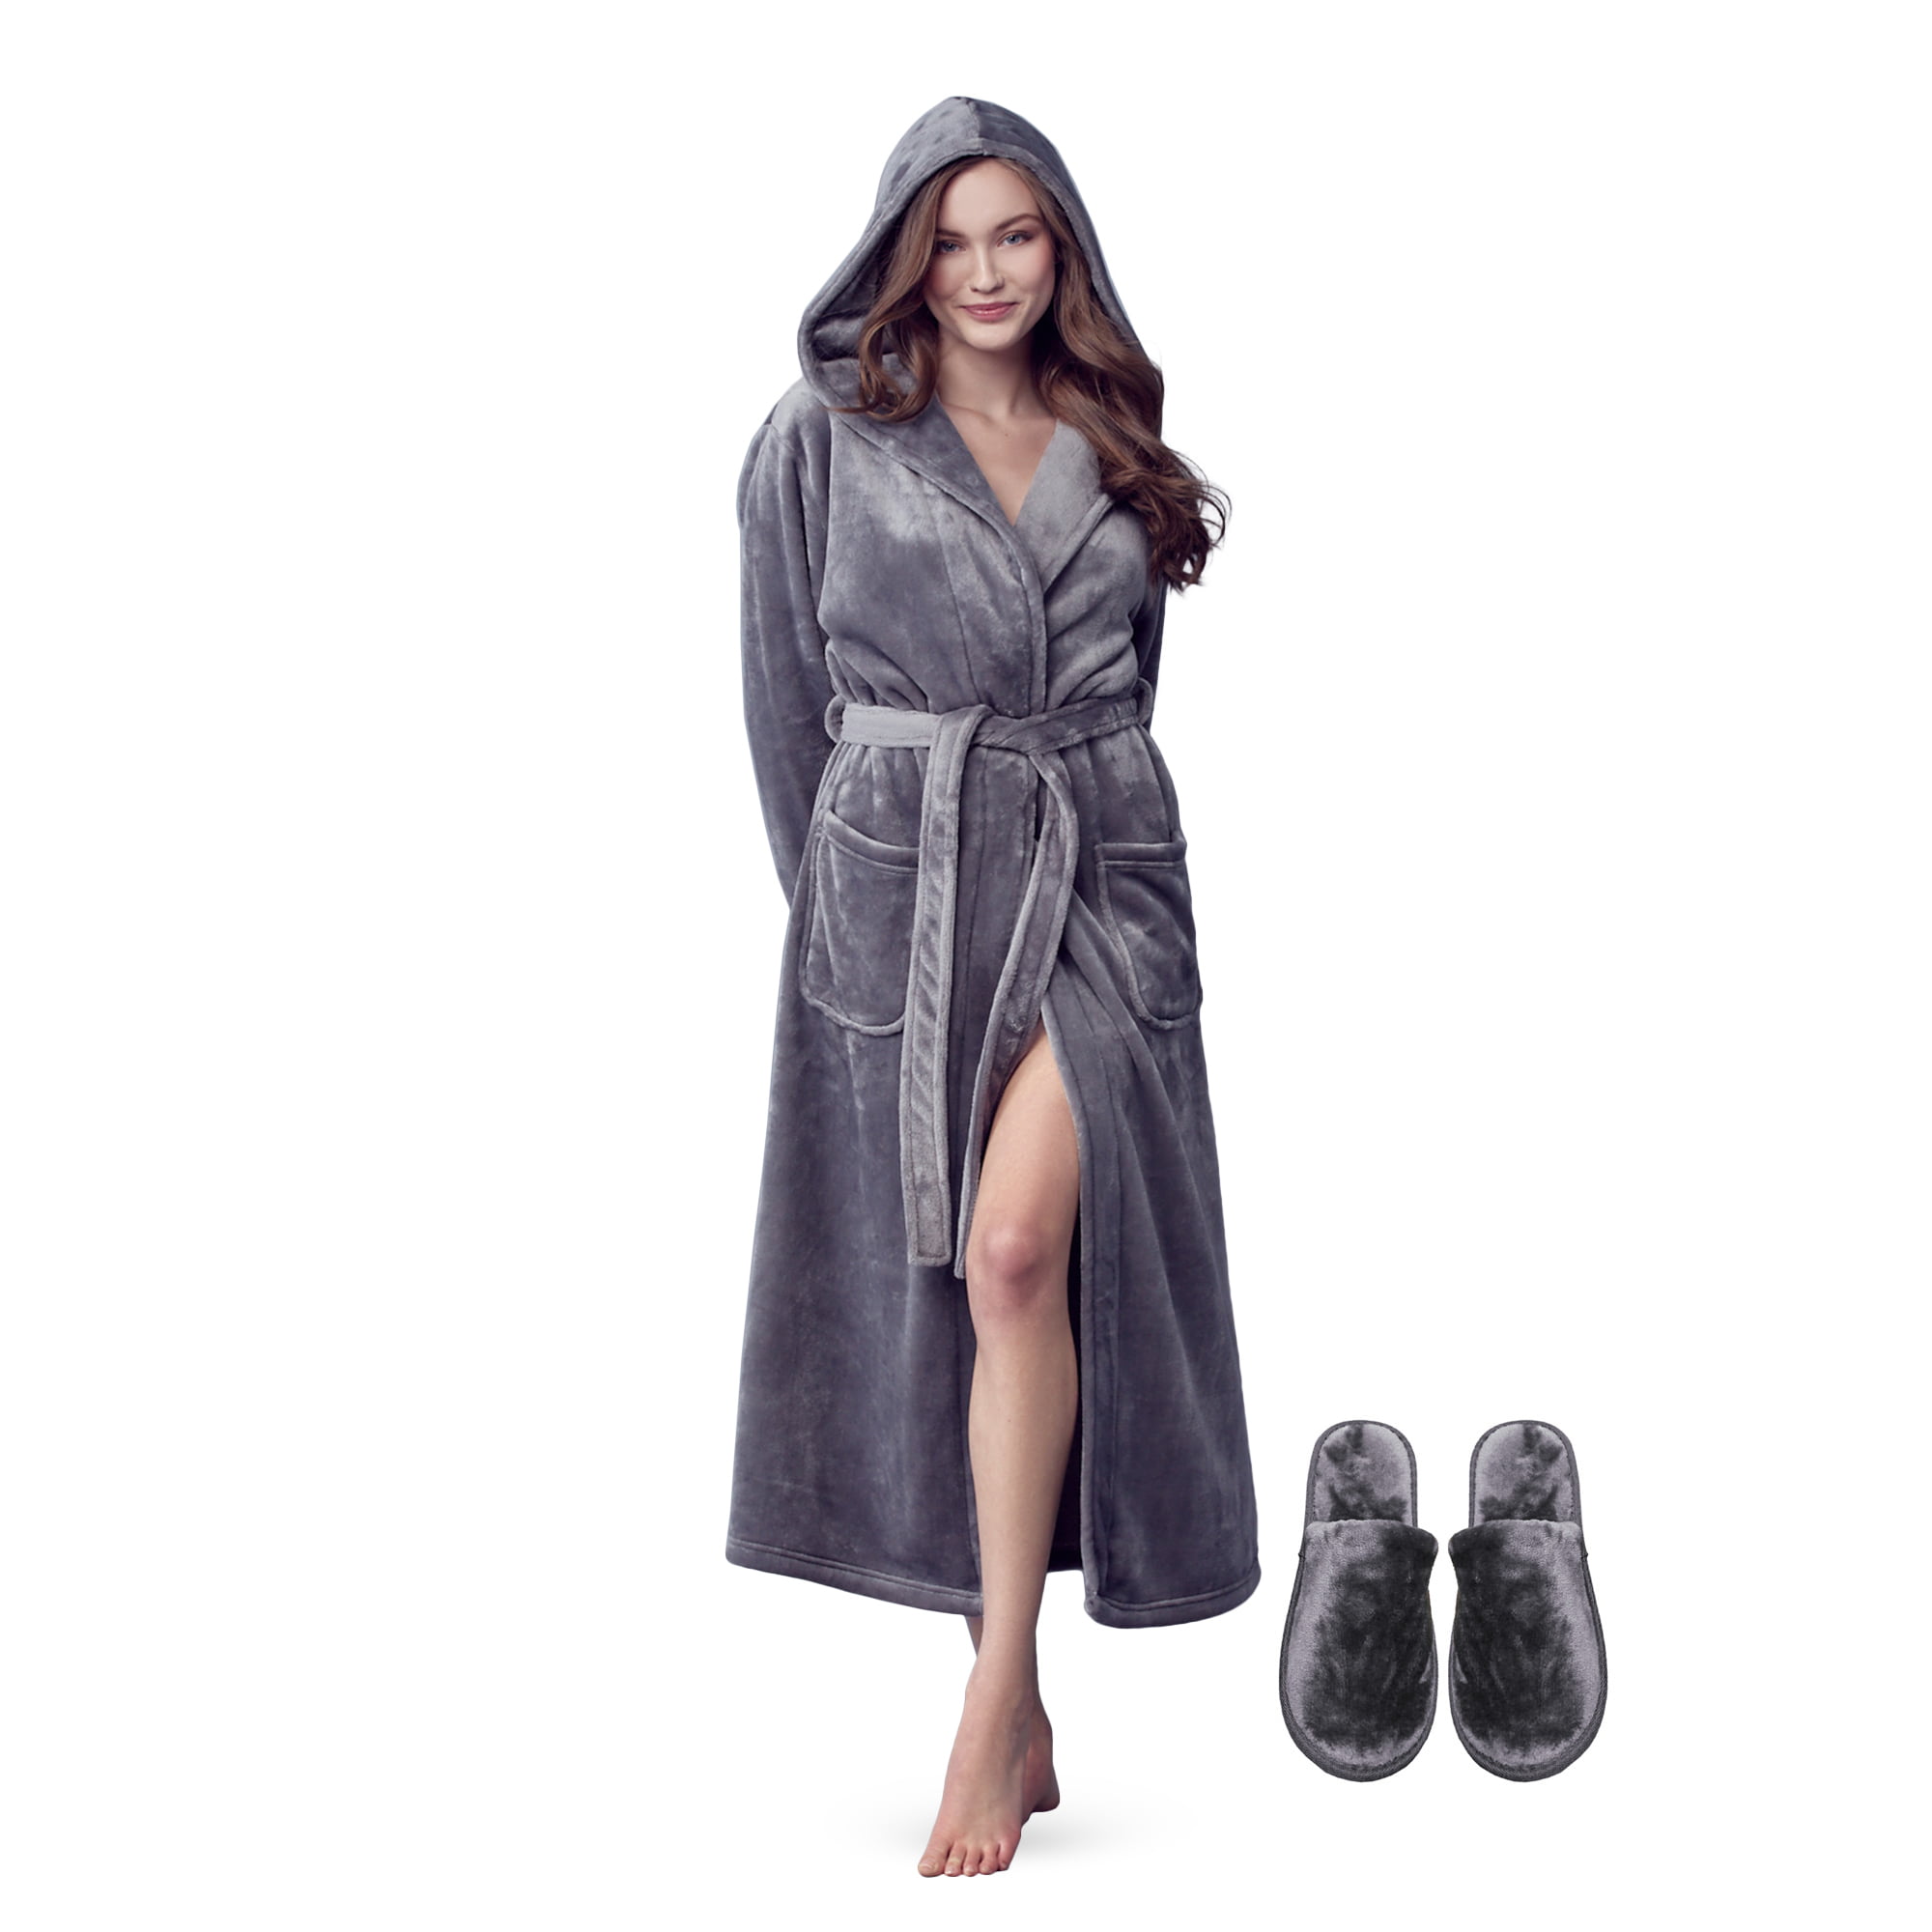 Patricia Lingerie Women's Ultra Soft Velour Robe Housecoat with Zipper and 2 Front Pockets